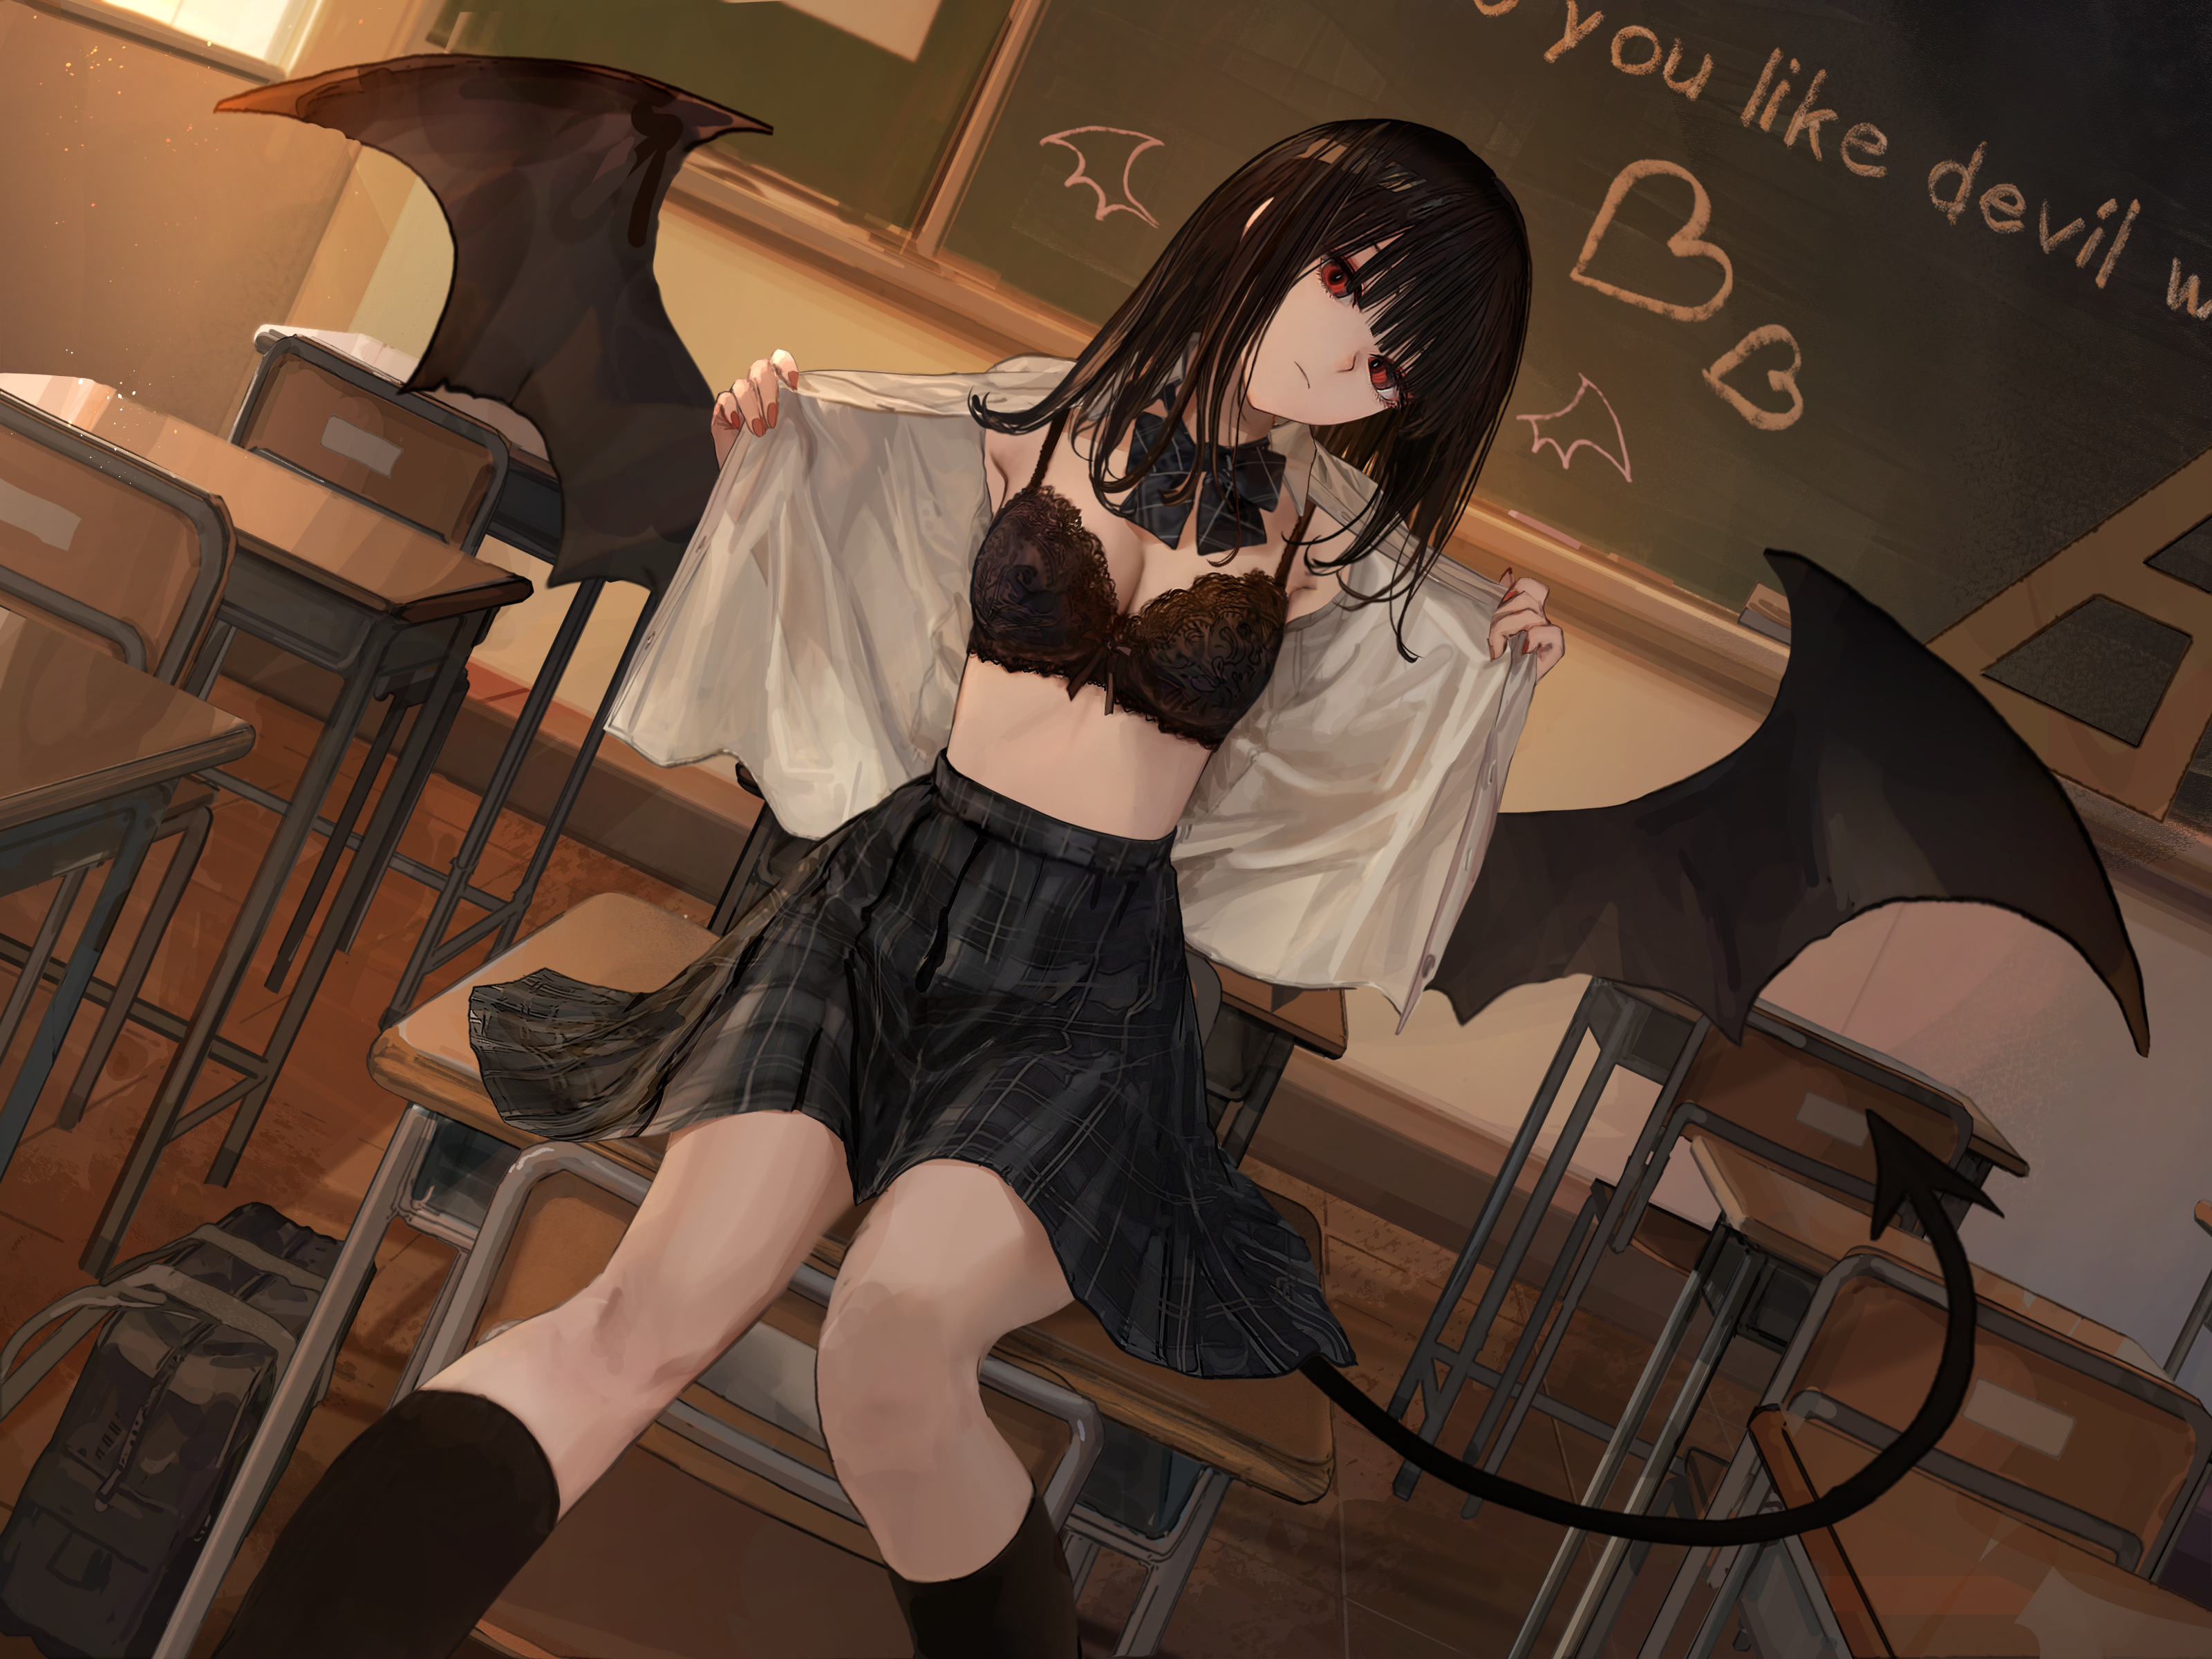 Anime 3200x2400 anime anime girls black hair red eyes school uniform black bras black wings classroom demon tail schoolgirl indoors women indoors desk chair sitting bow tie small boobs cleavage demon girls wings looking at viewer sunset sunset glow bag chalkboard bare midriff closed mouth skirt